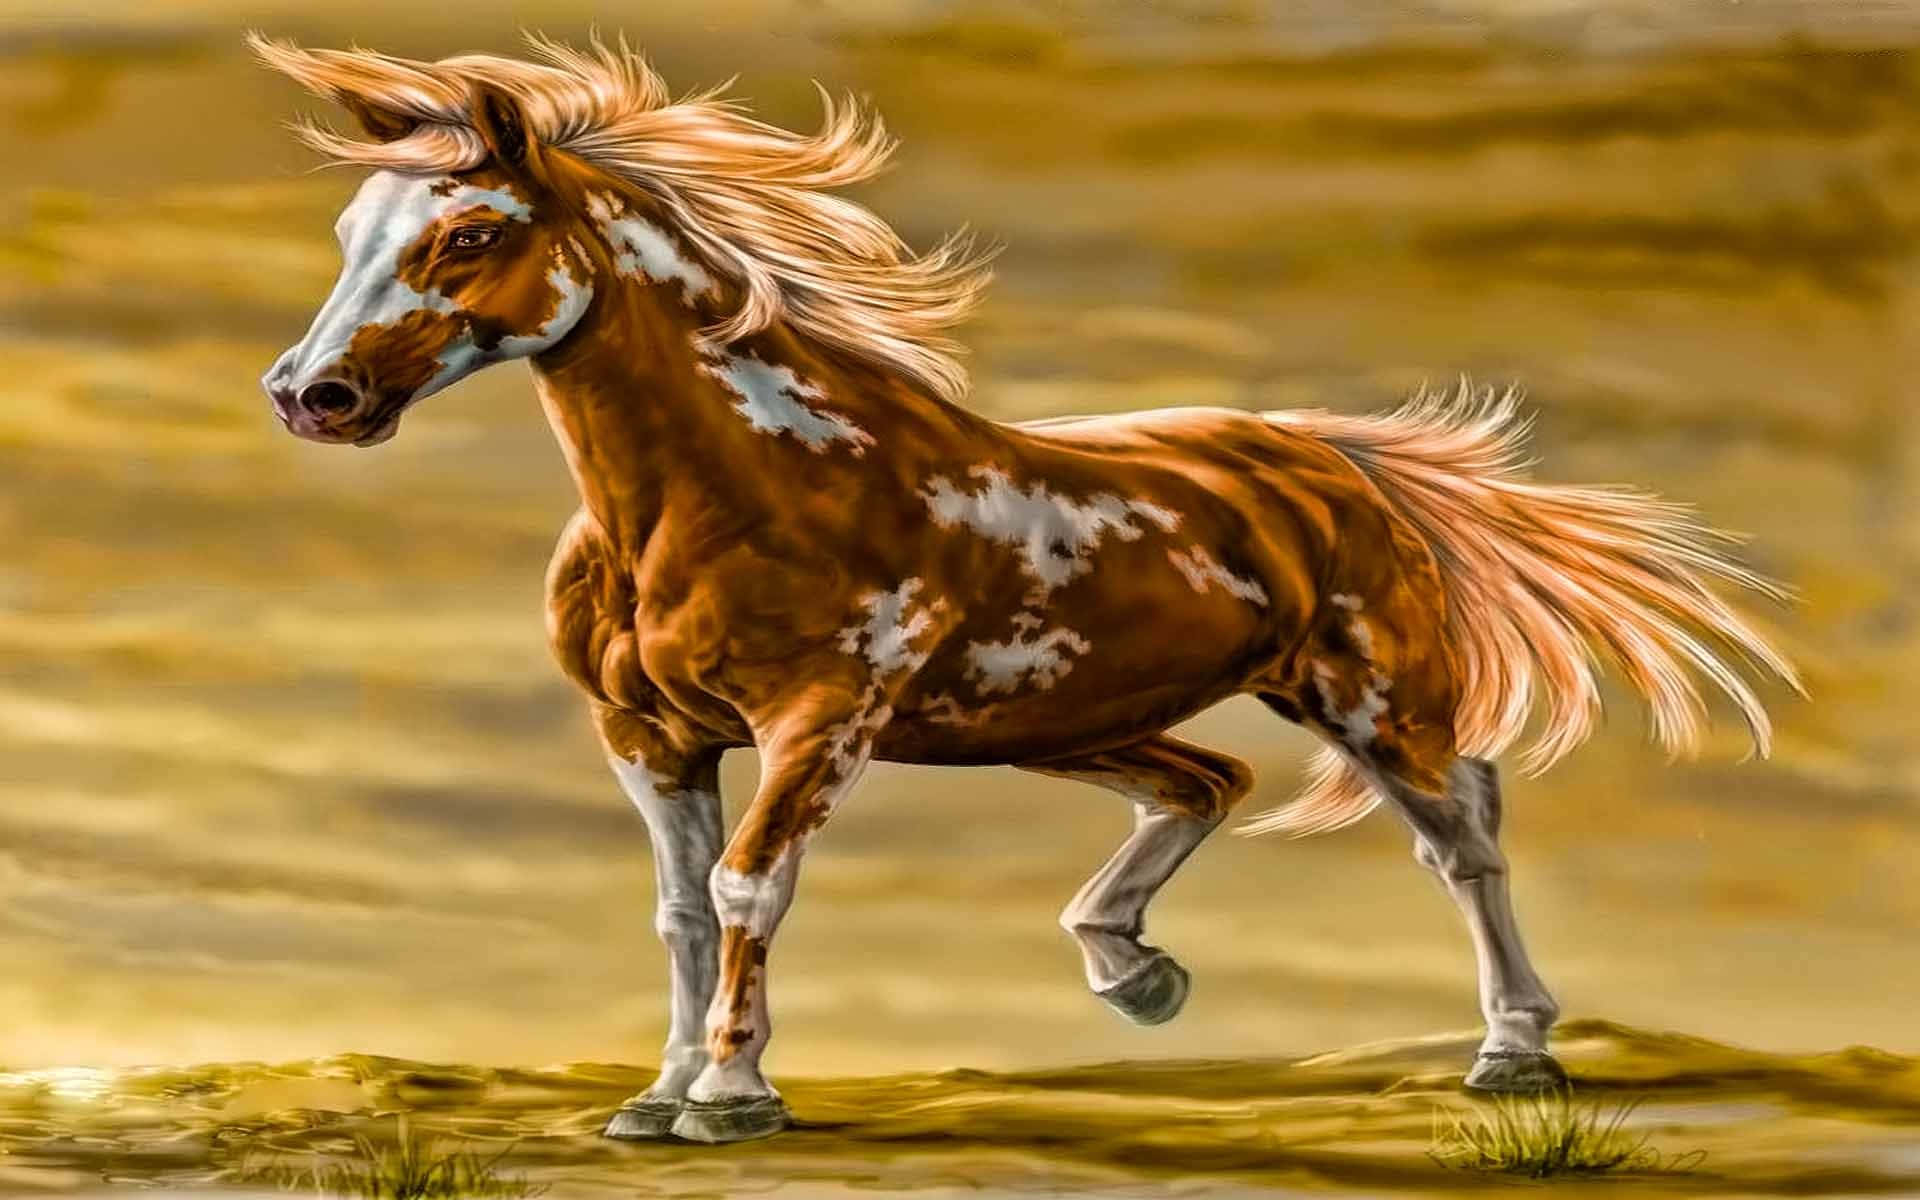 a painting of a horse running in the desert